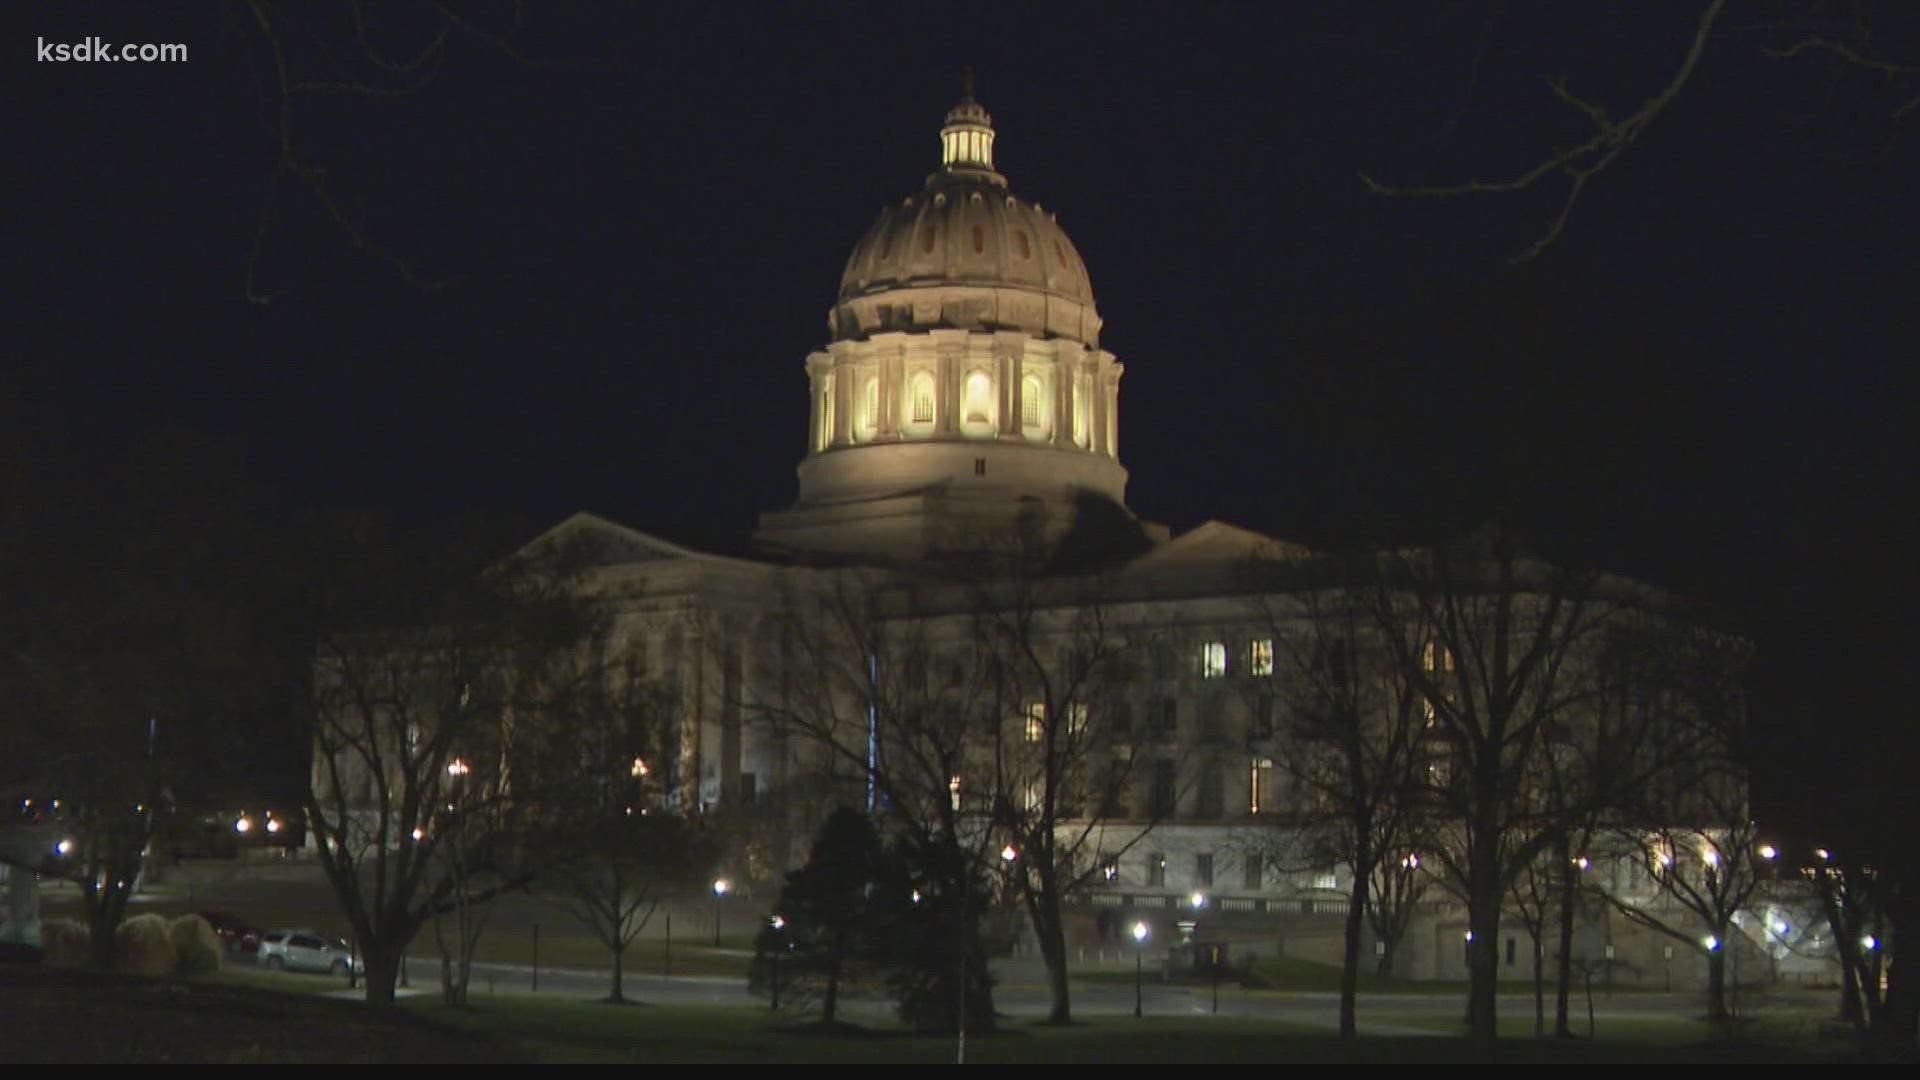 Lawmakers will likely consider a wide range of issues, including a recently passed gas tax increase and COVID-19 mandates.